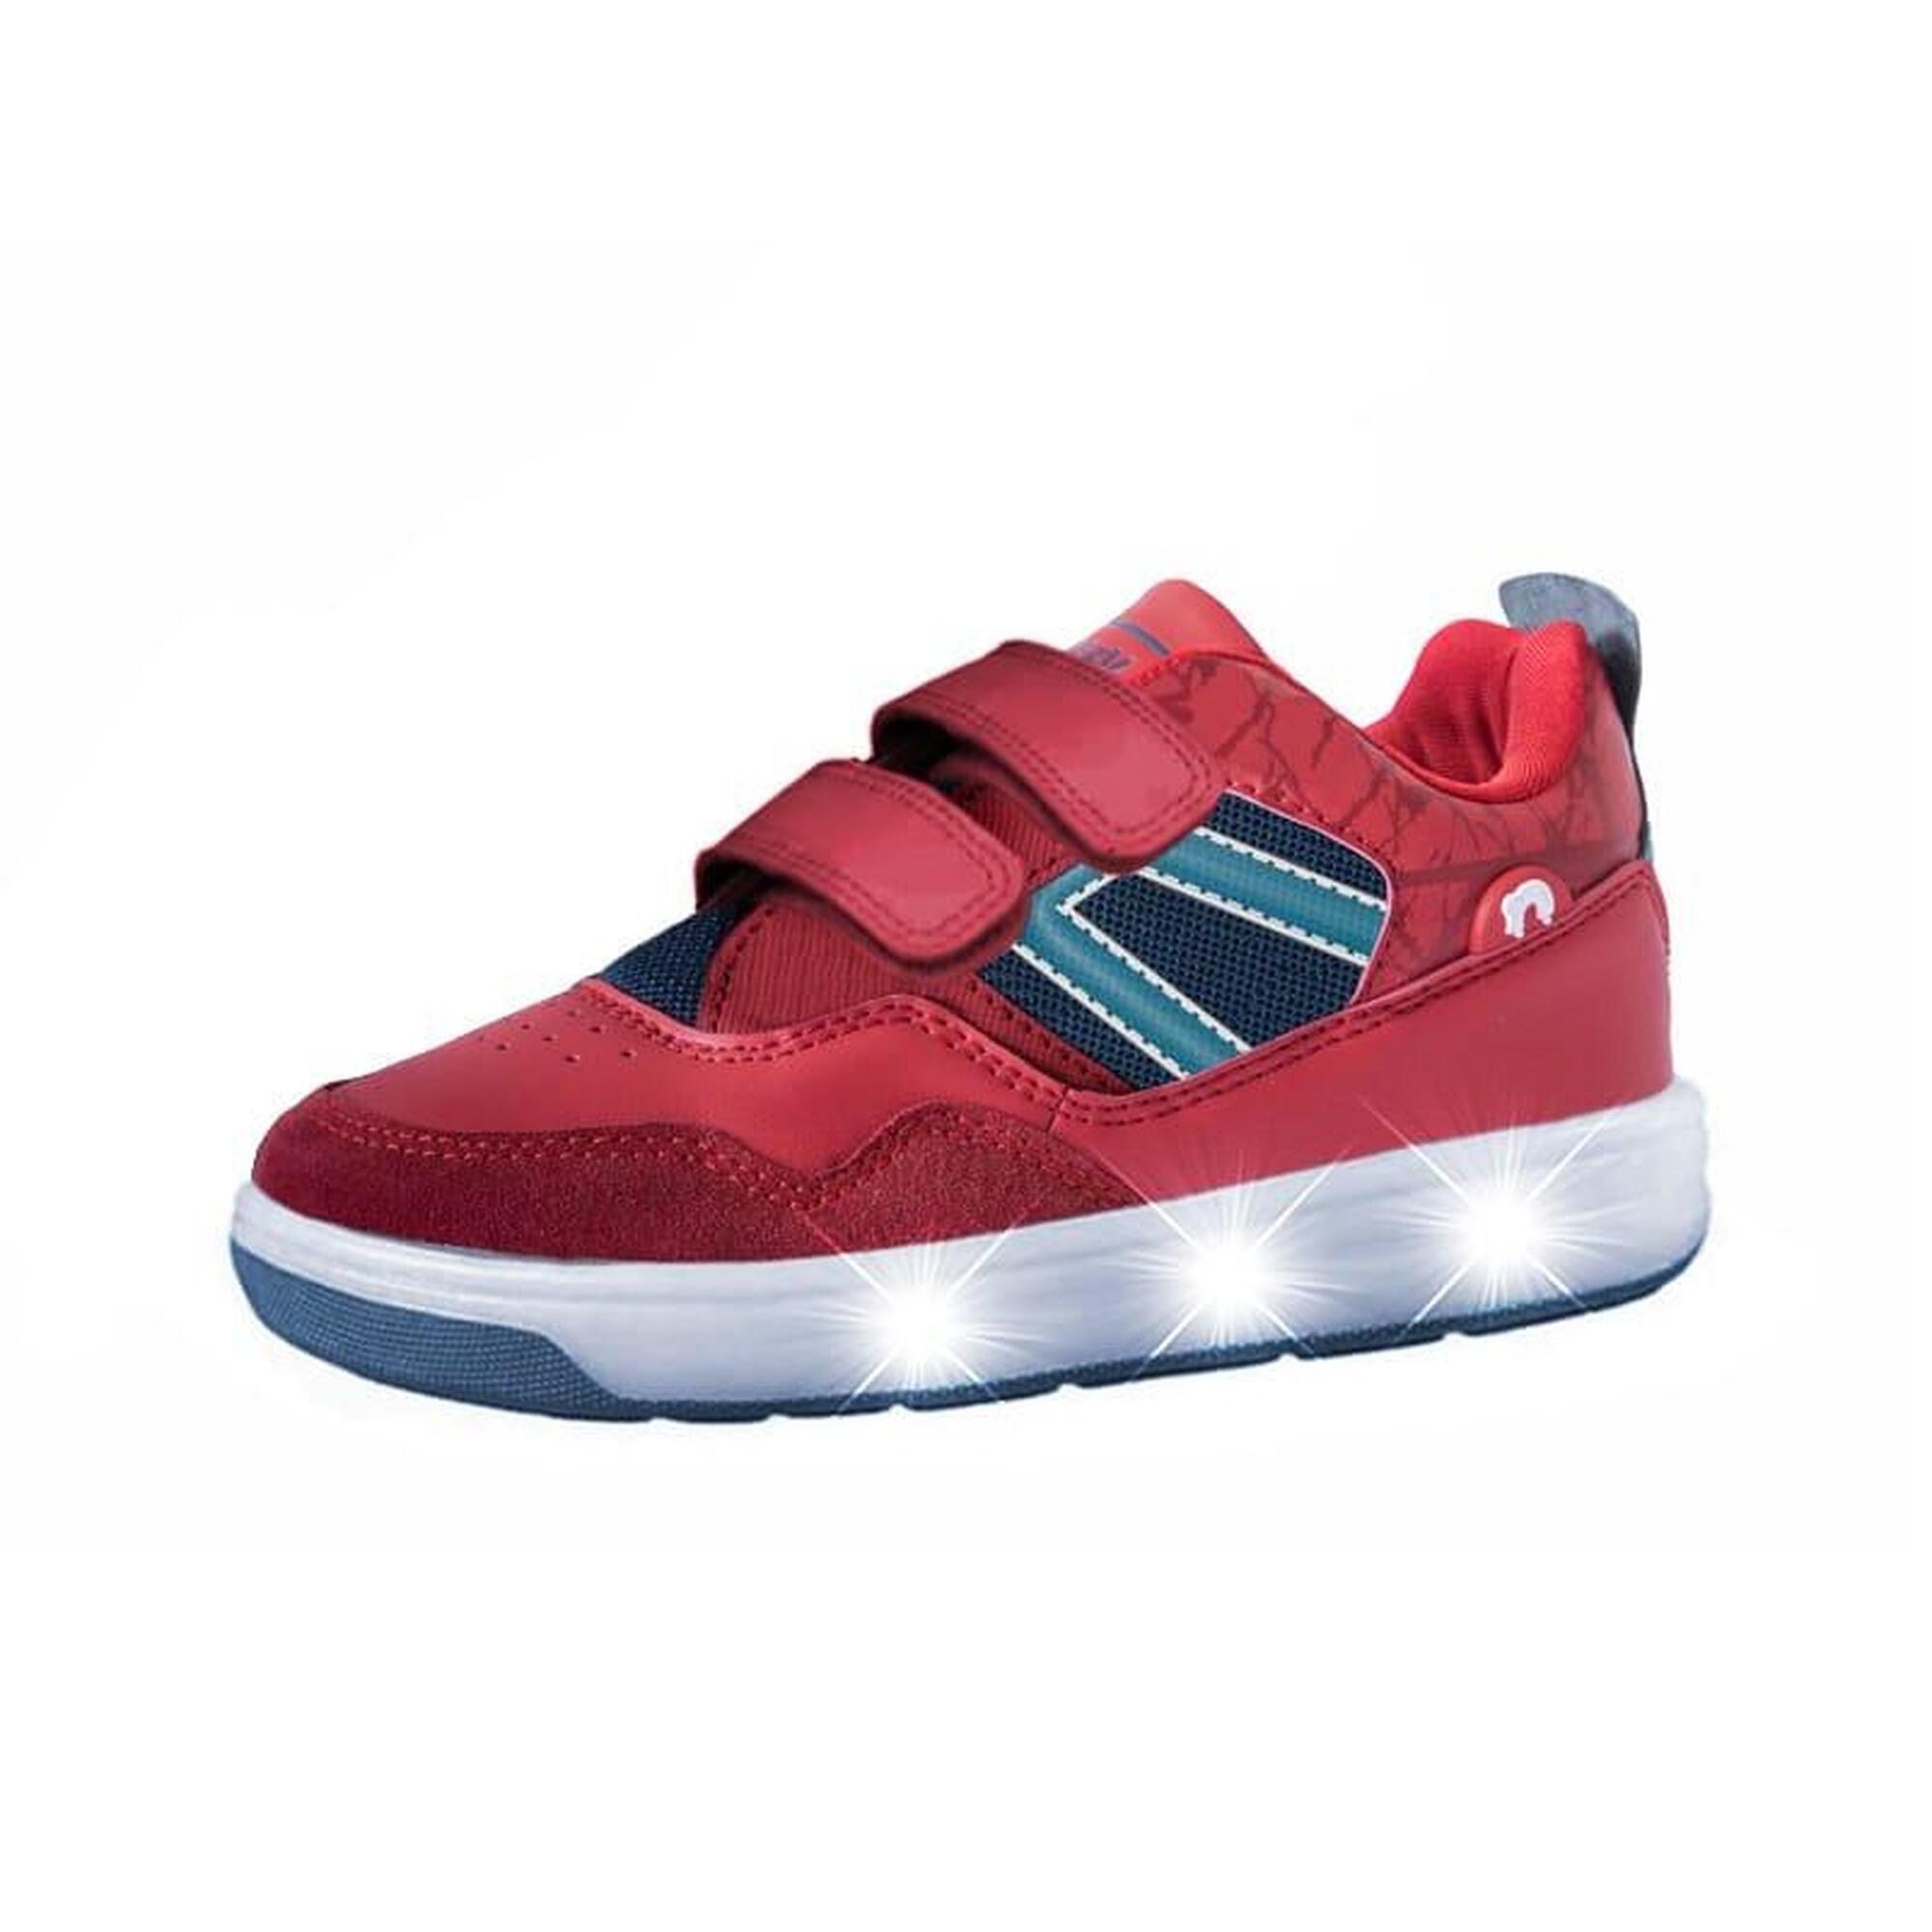 Chaussures à LED BREEZY ROLLERS 2196091 unisexe rouge/blanc